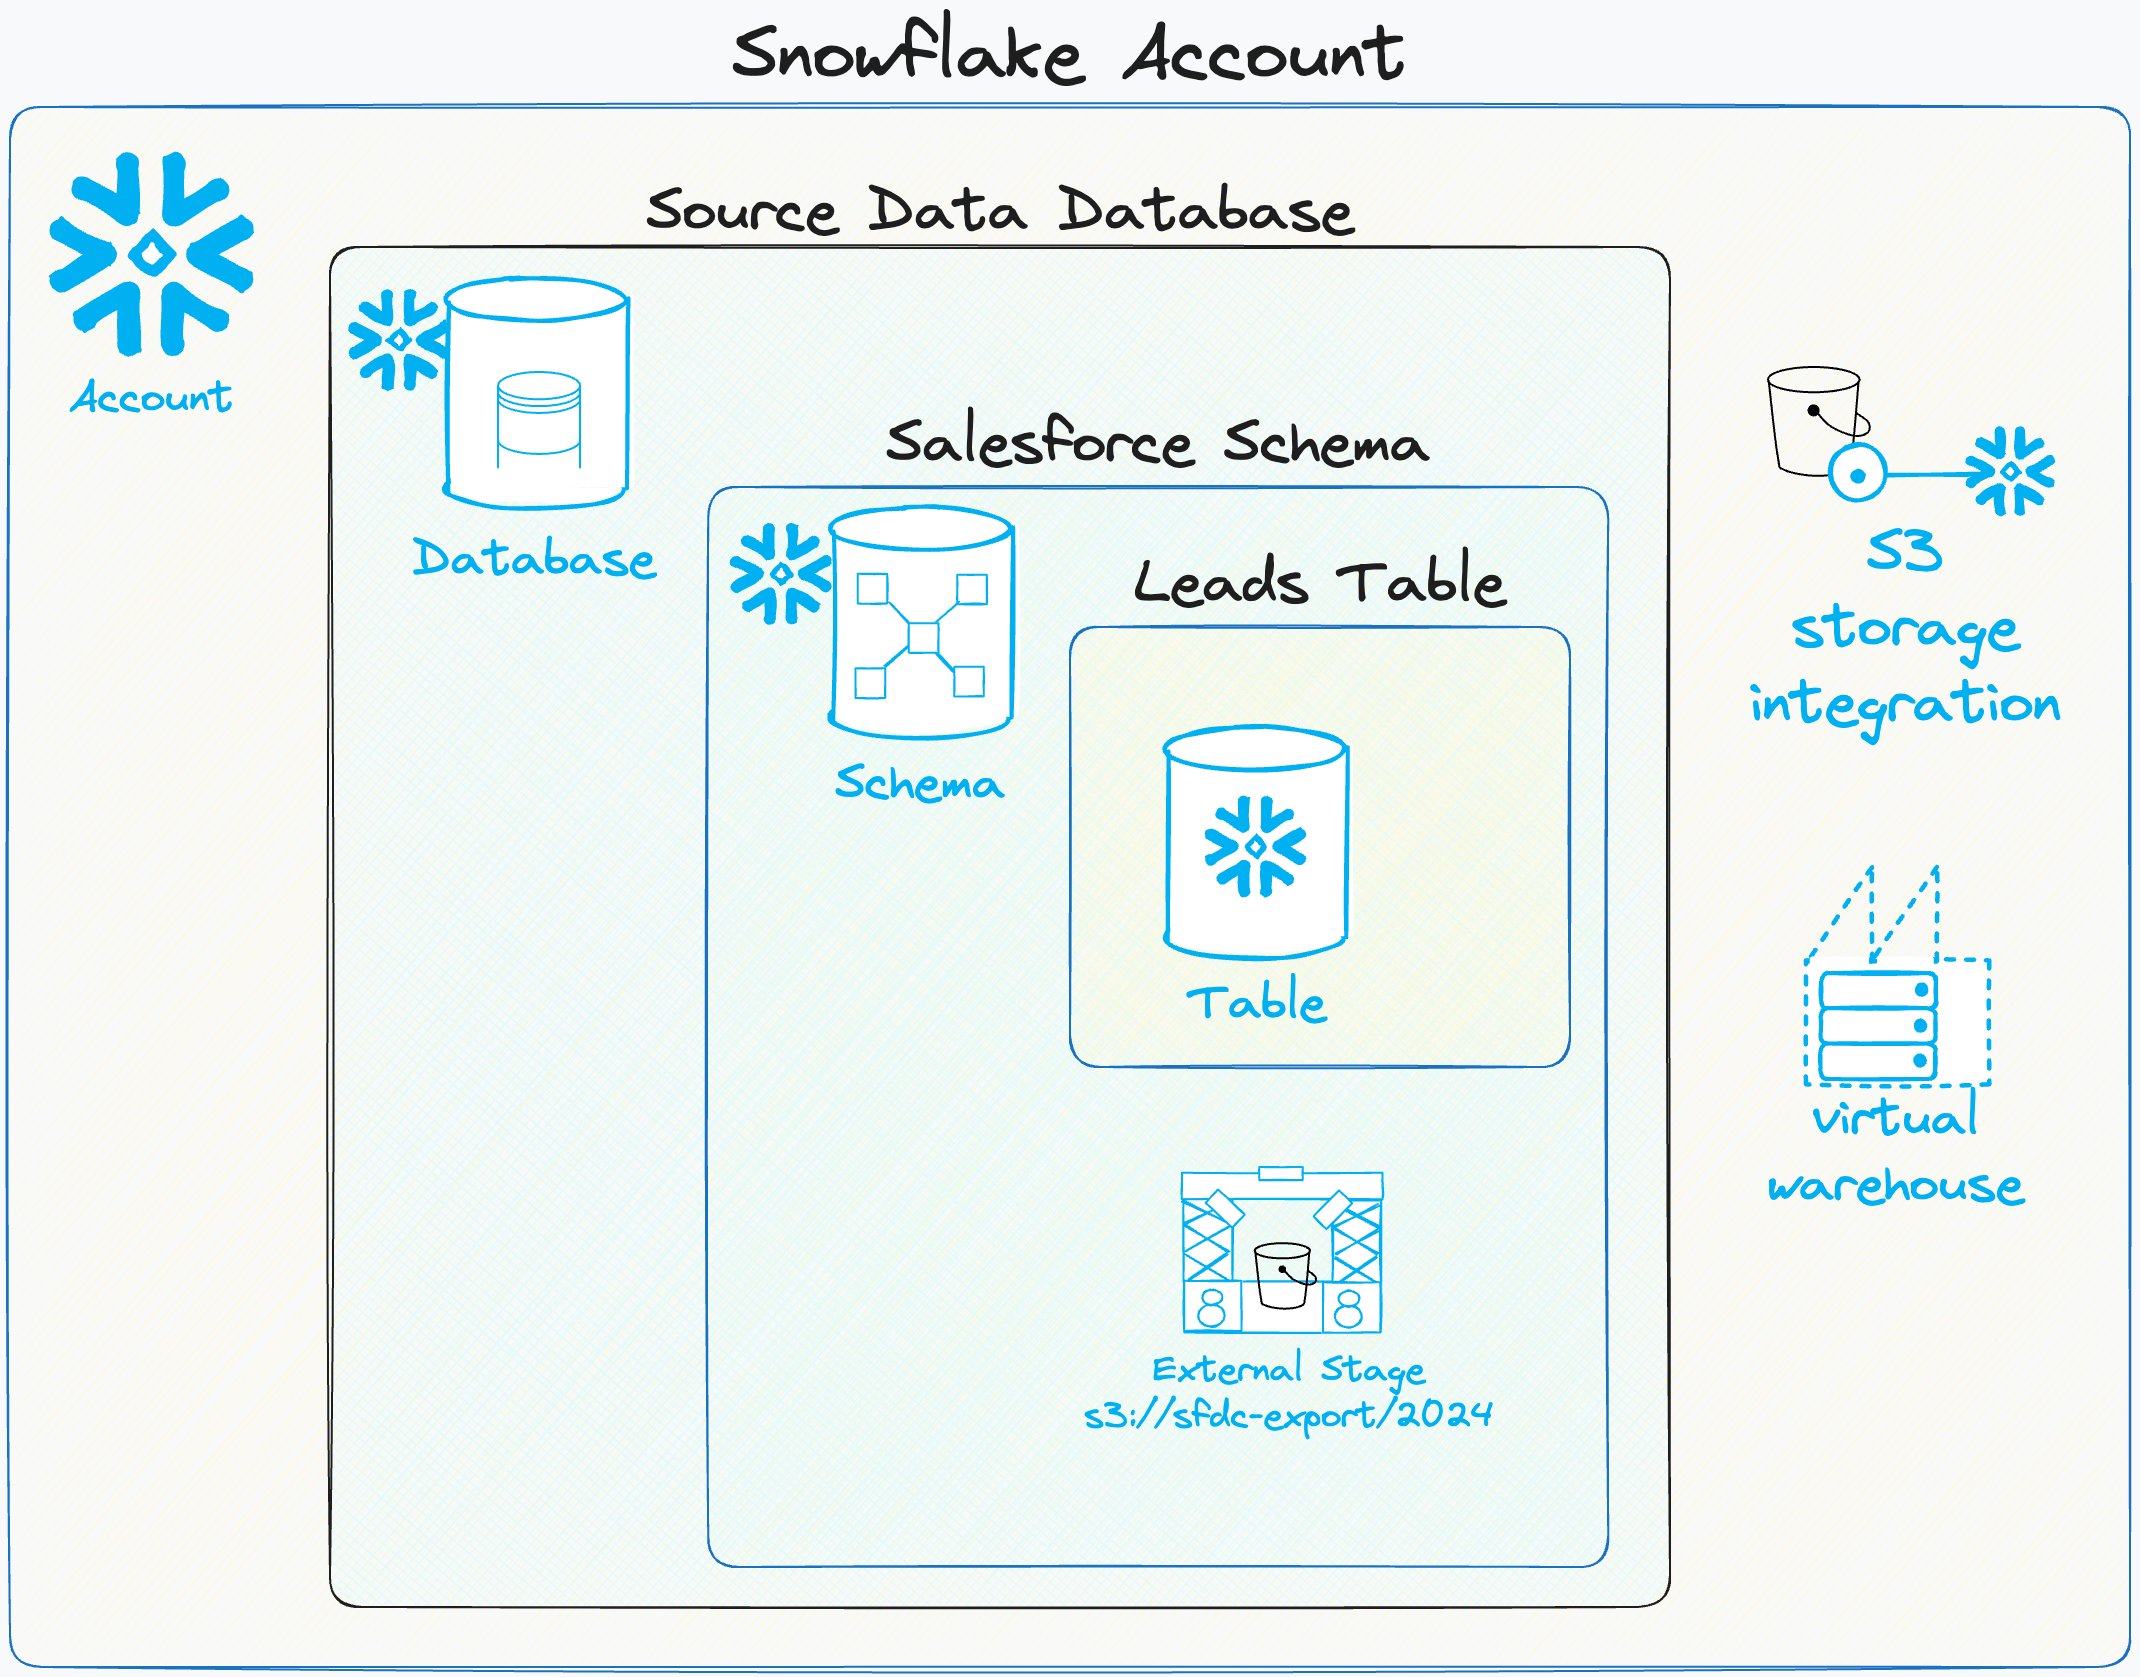 Snowflake access control objects